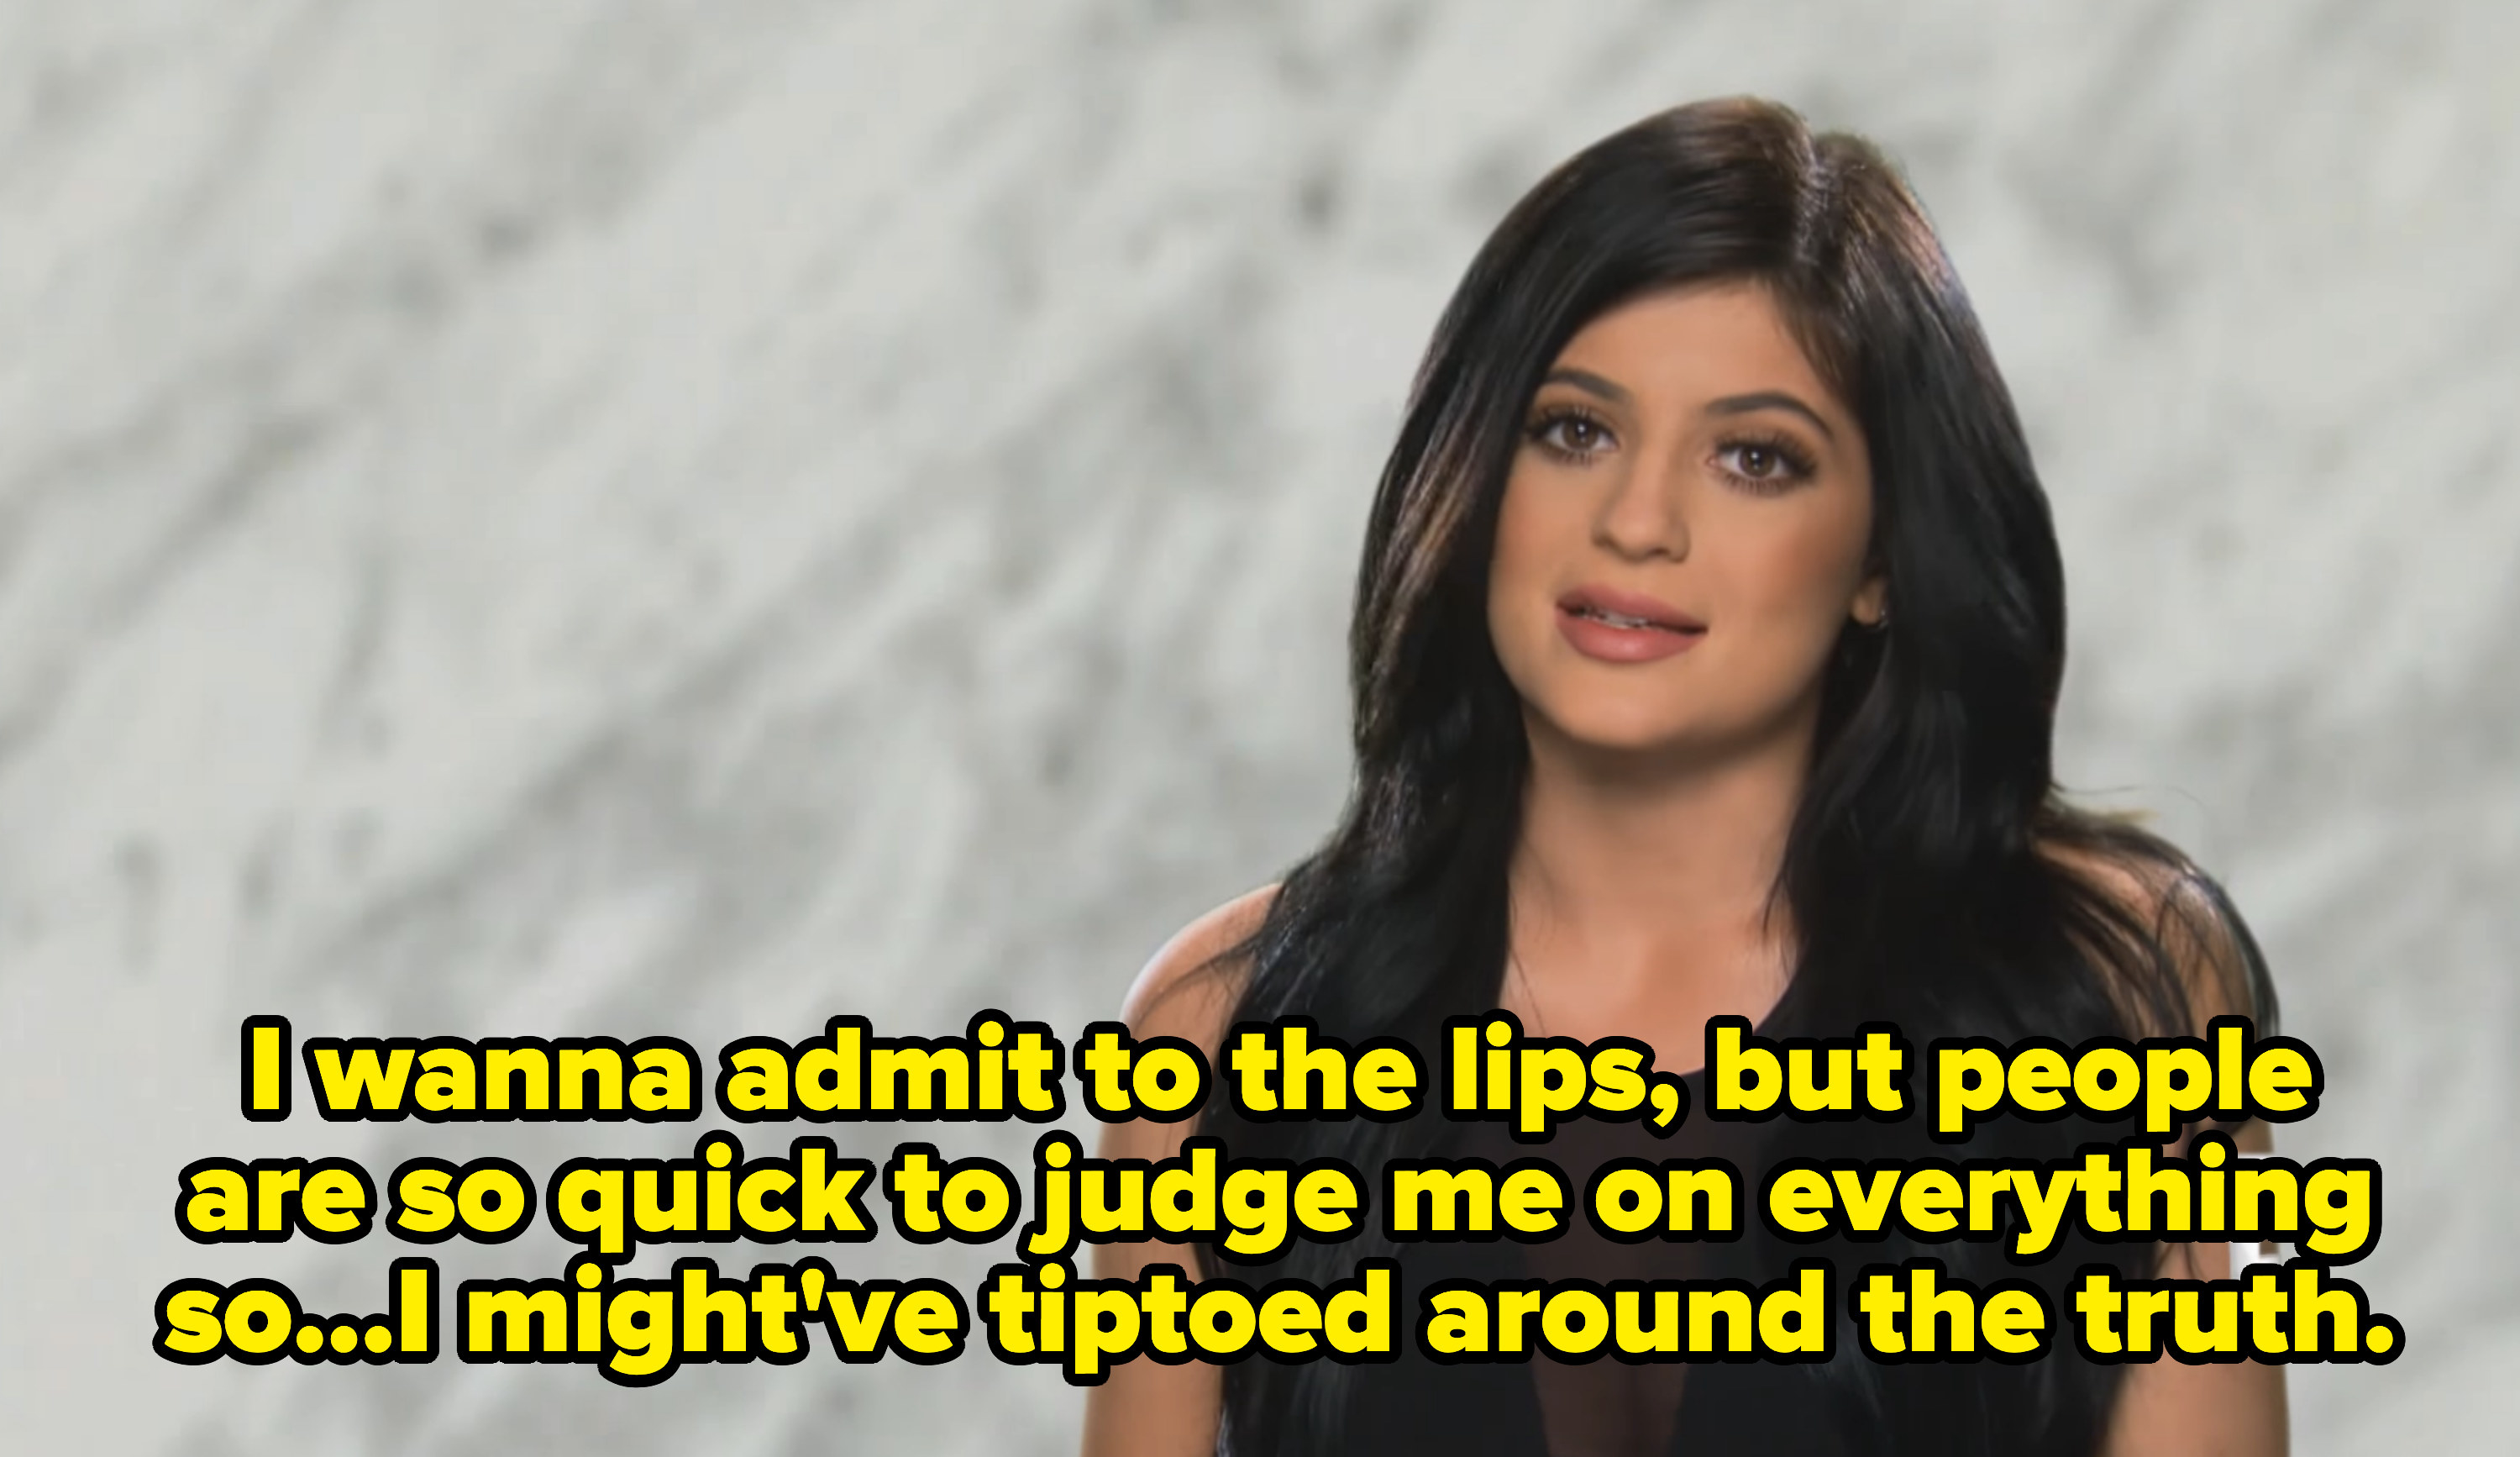 kylie during the interview on her show